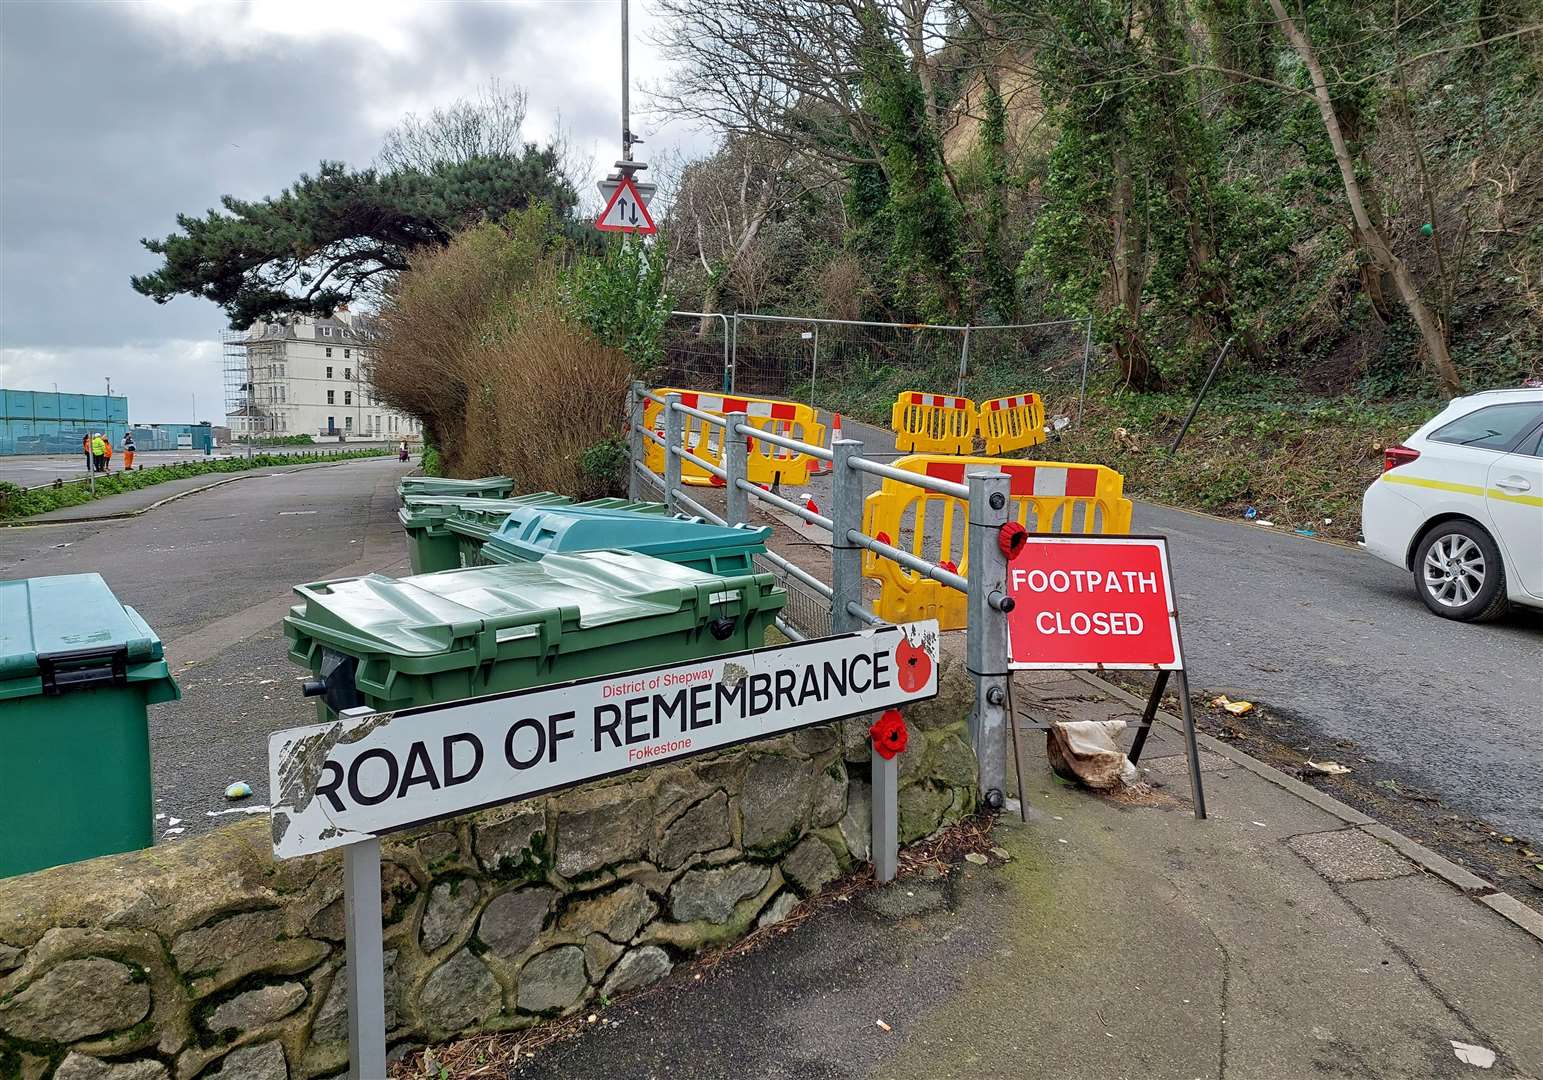 Road of Remembrance in Folkestone suffered its second landslip in less than a month